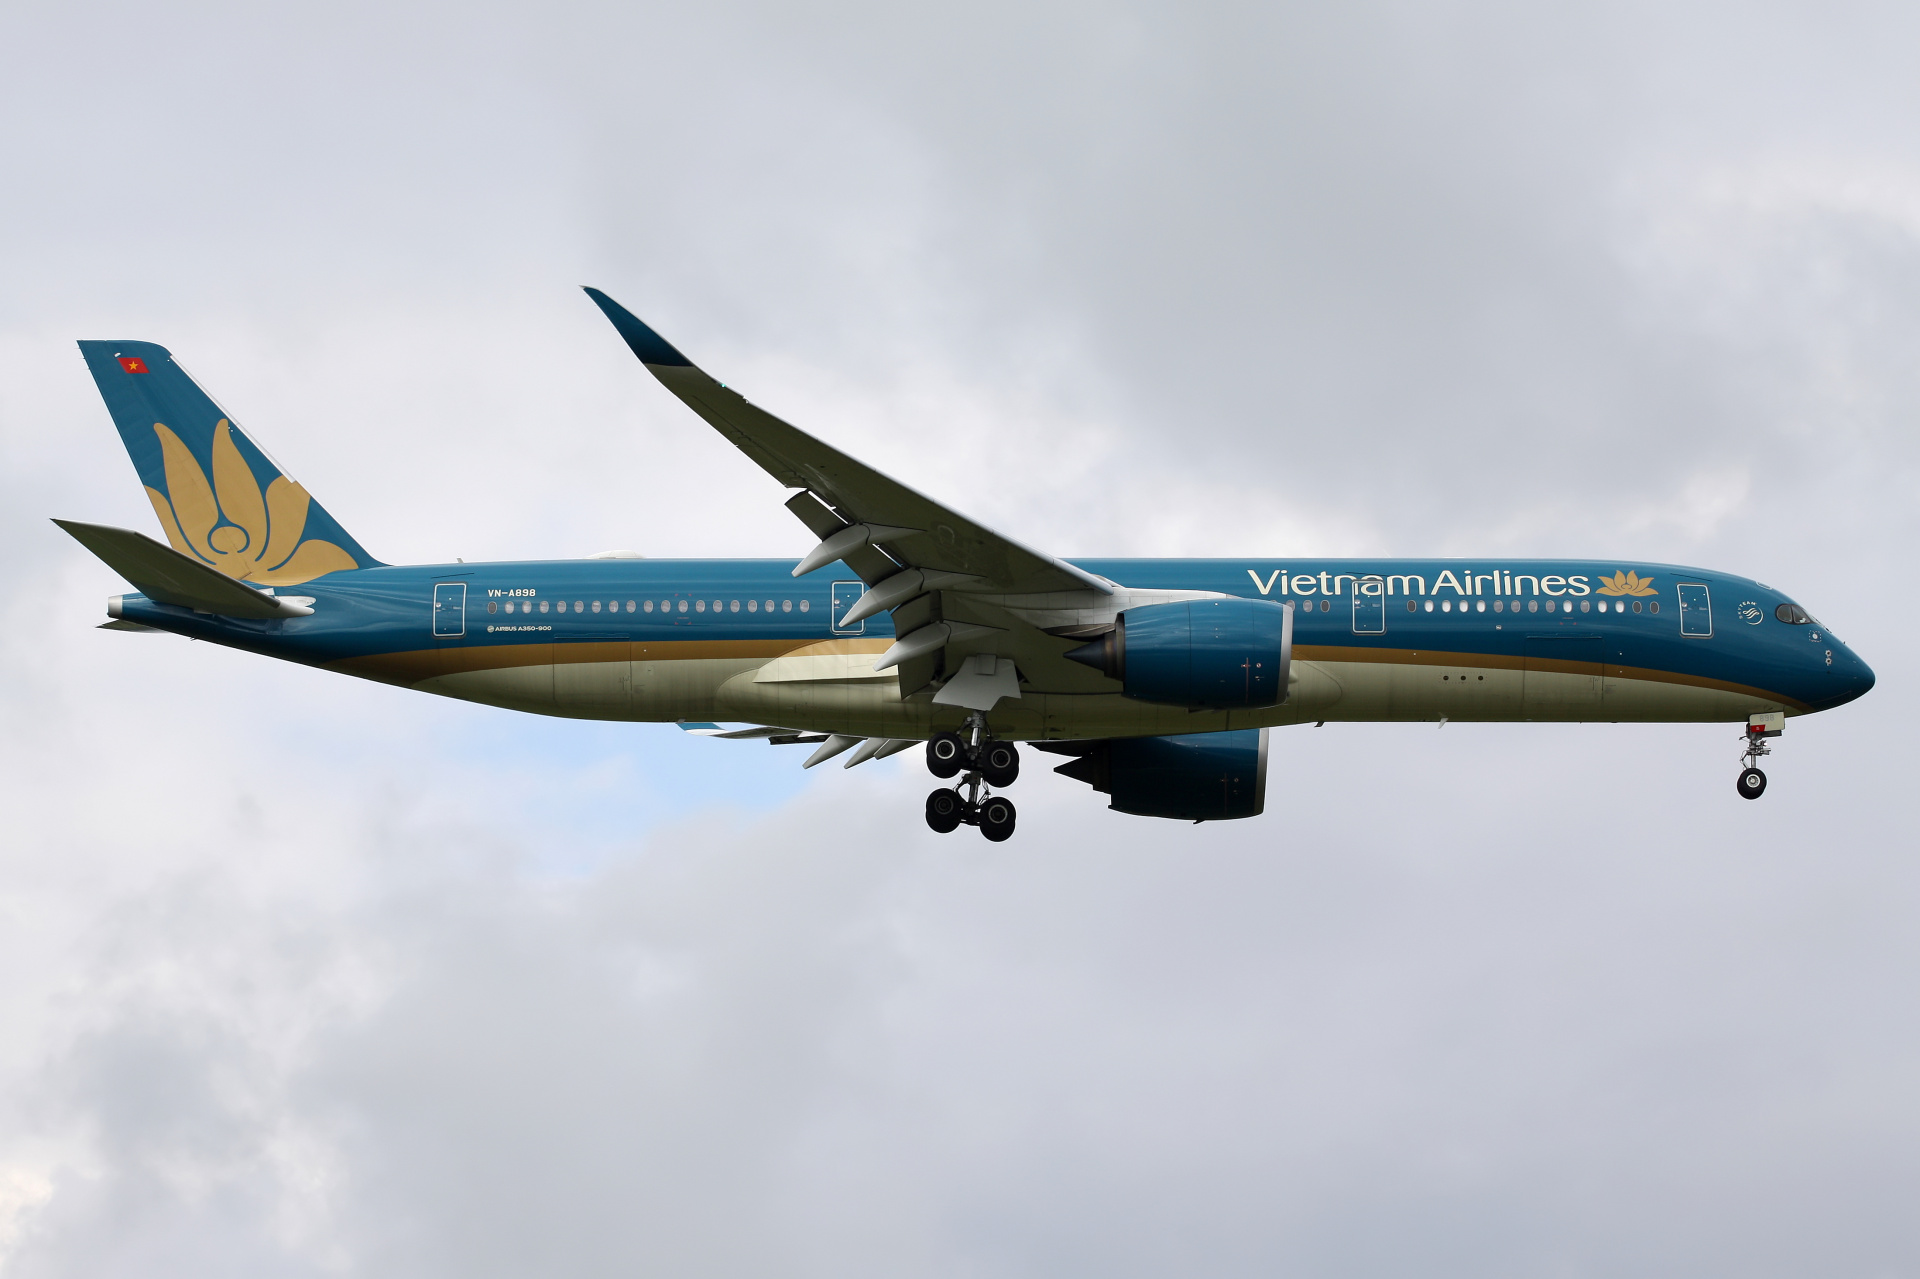 VN-A898, Vietnam Airlines (Aircraft » EPWA Spotting » Airbus A350-900)